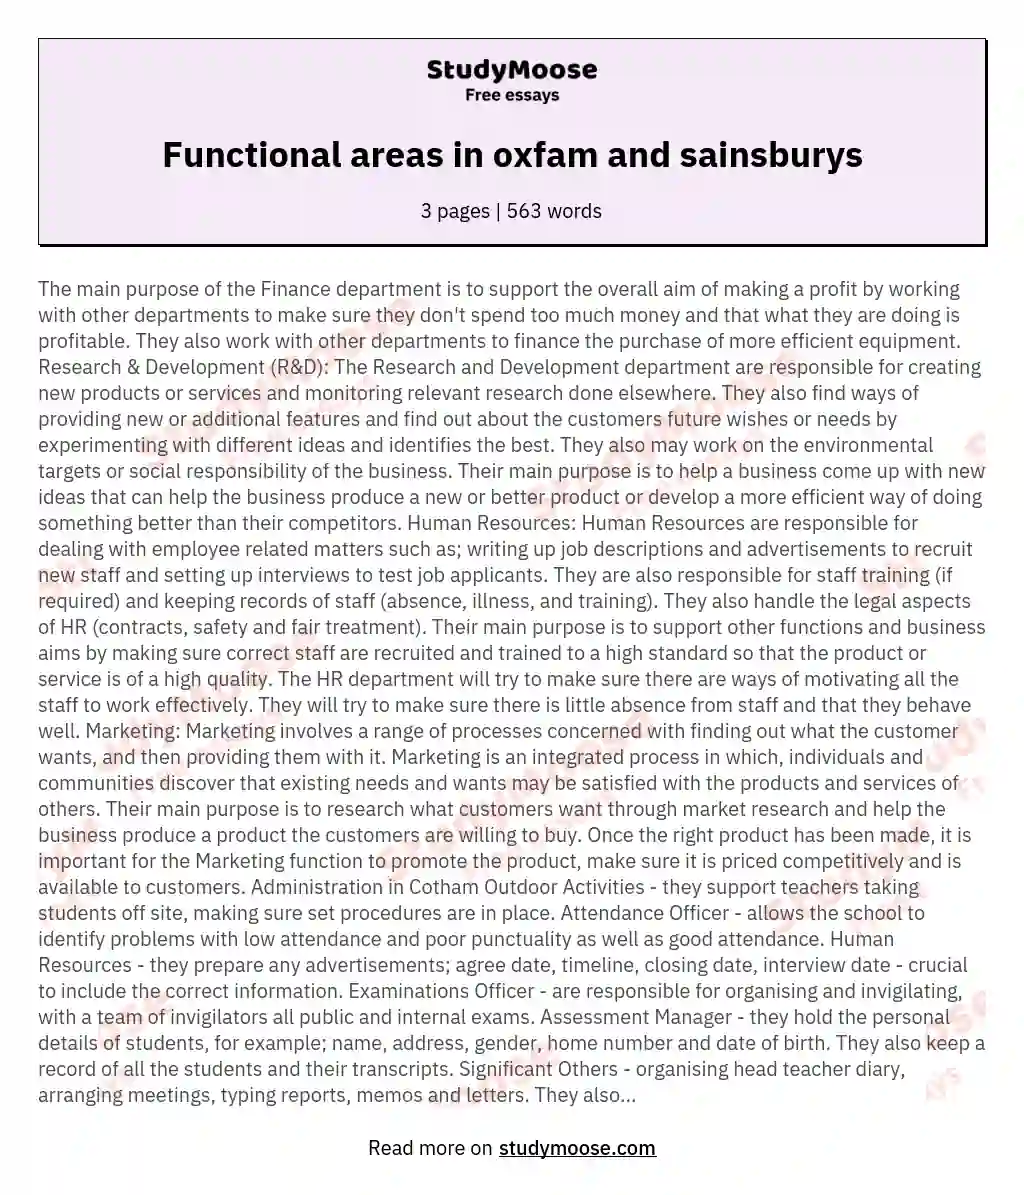 Functional areas in oxfam and sainsburys